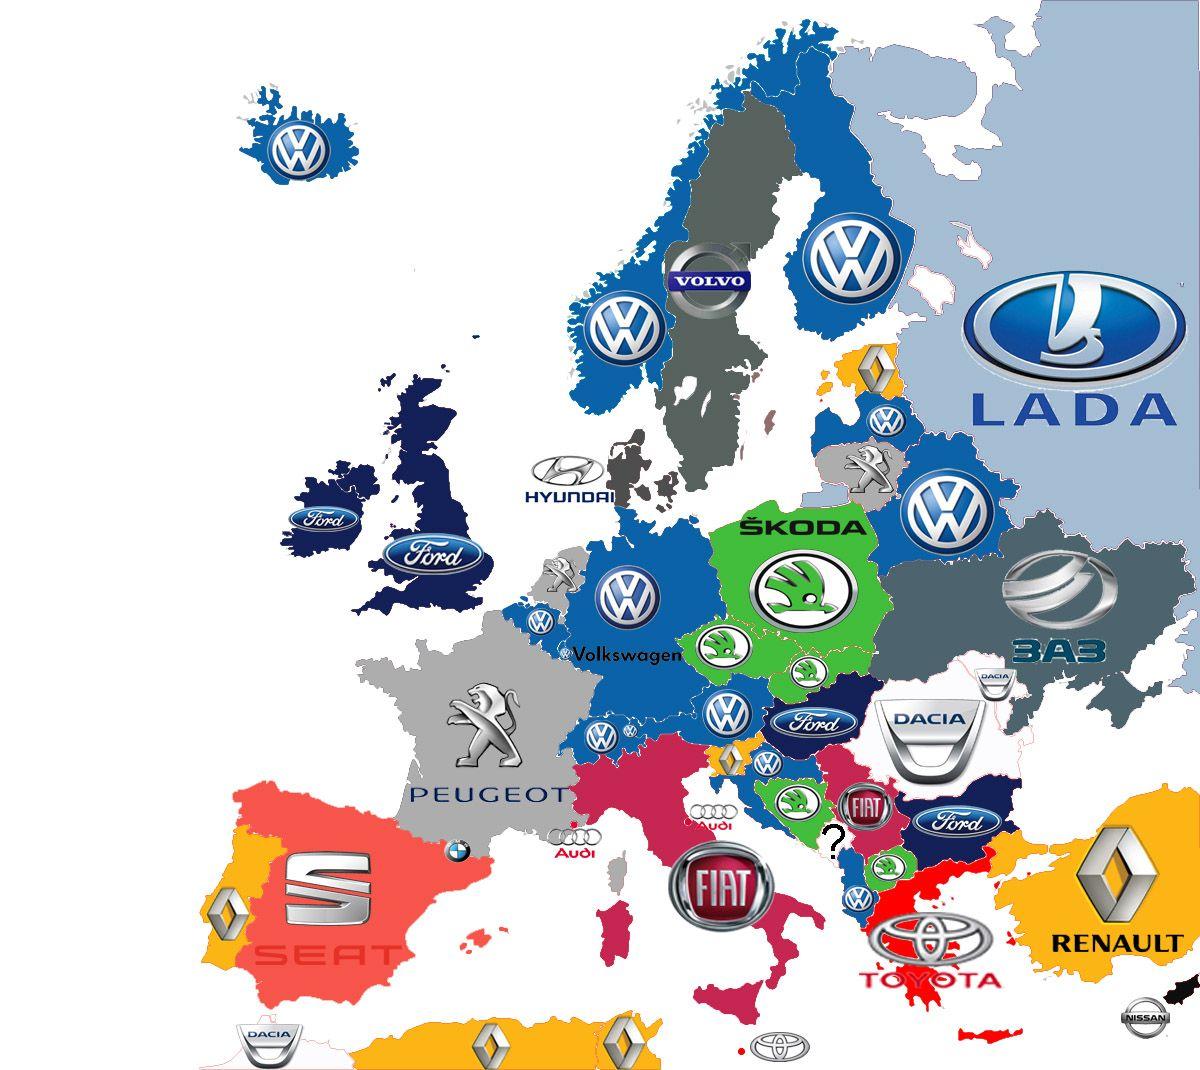 Most Popular Car Brand Logo - Brand of top selling car in Europe [1200x1070] [OC]